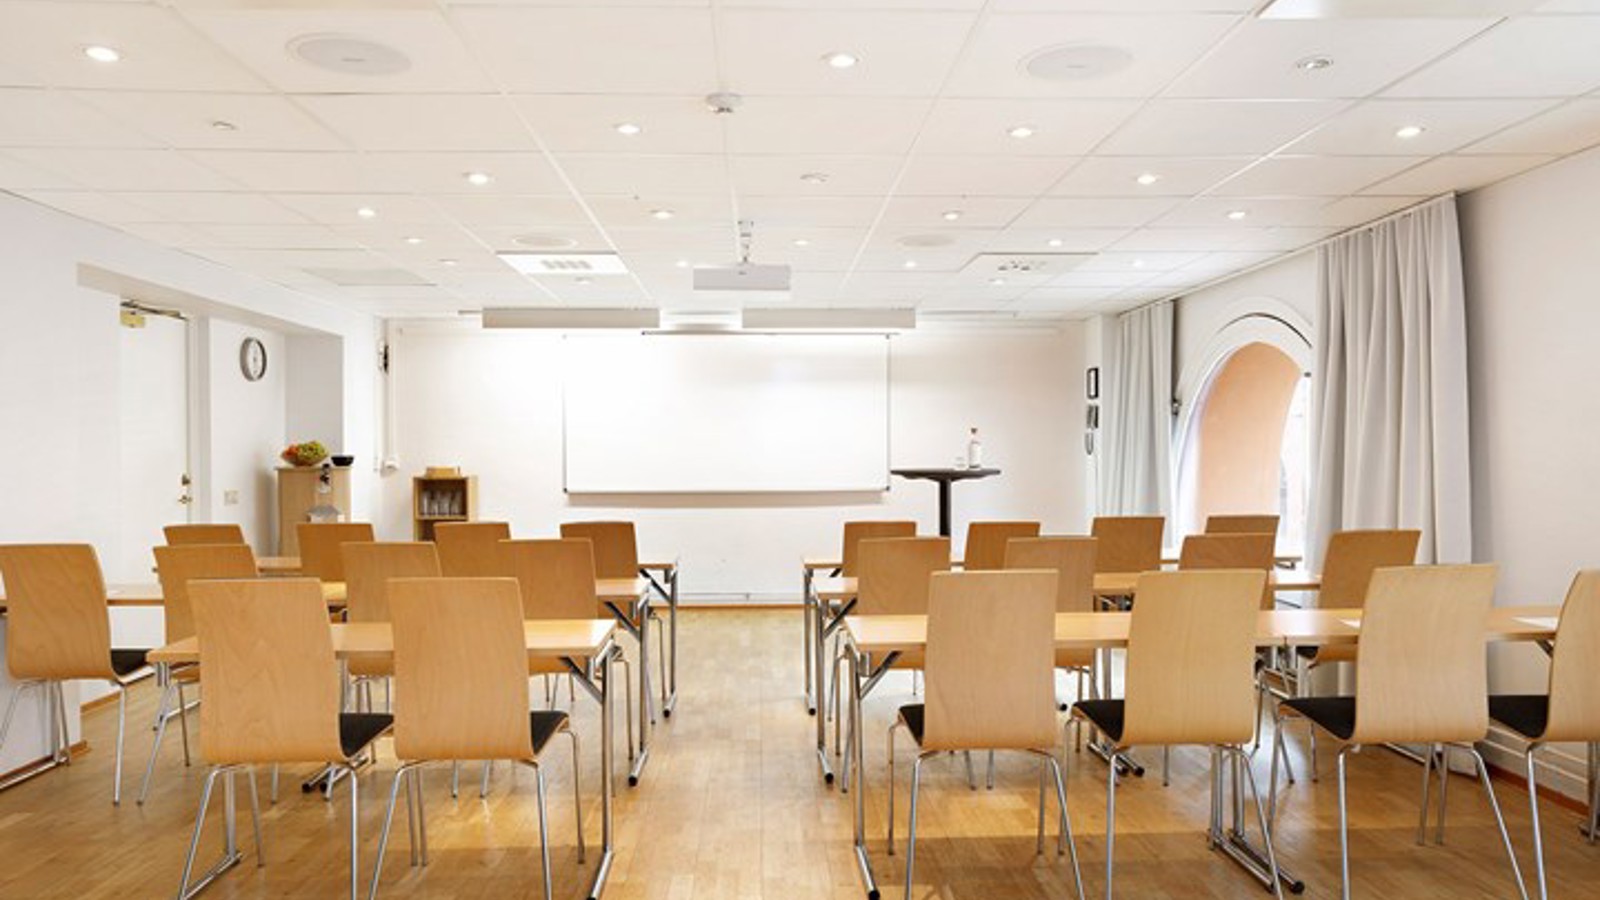 Bright conference room with school seating, white walls and wooden floor